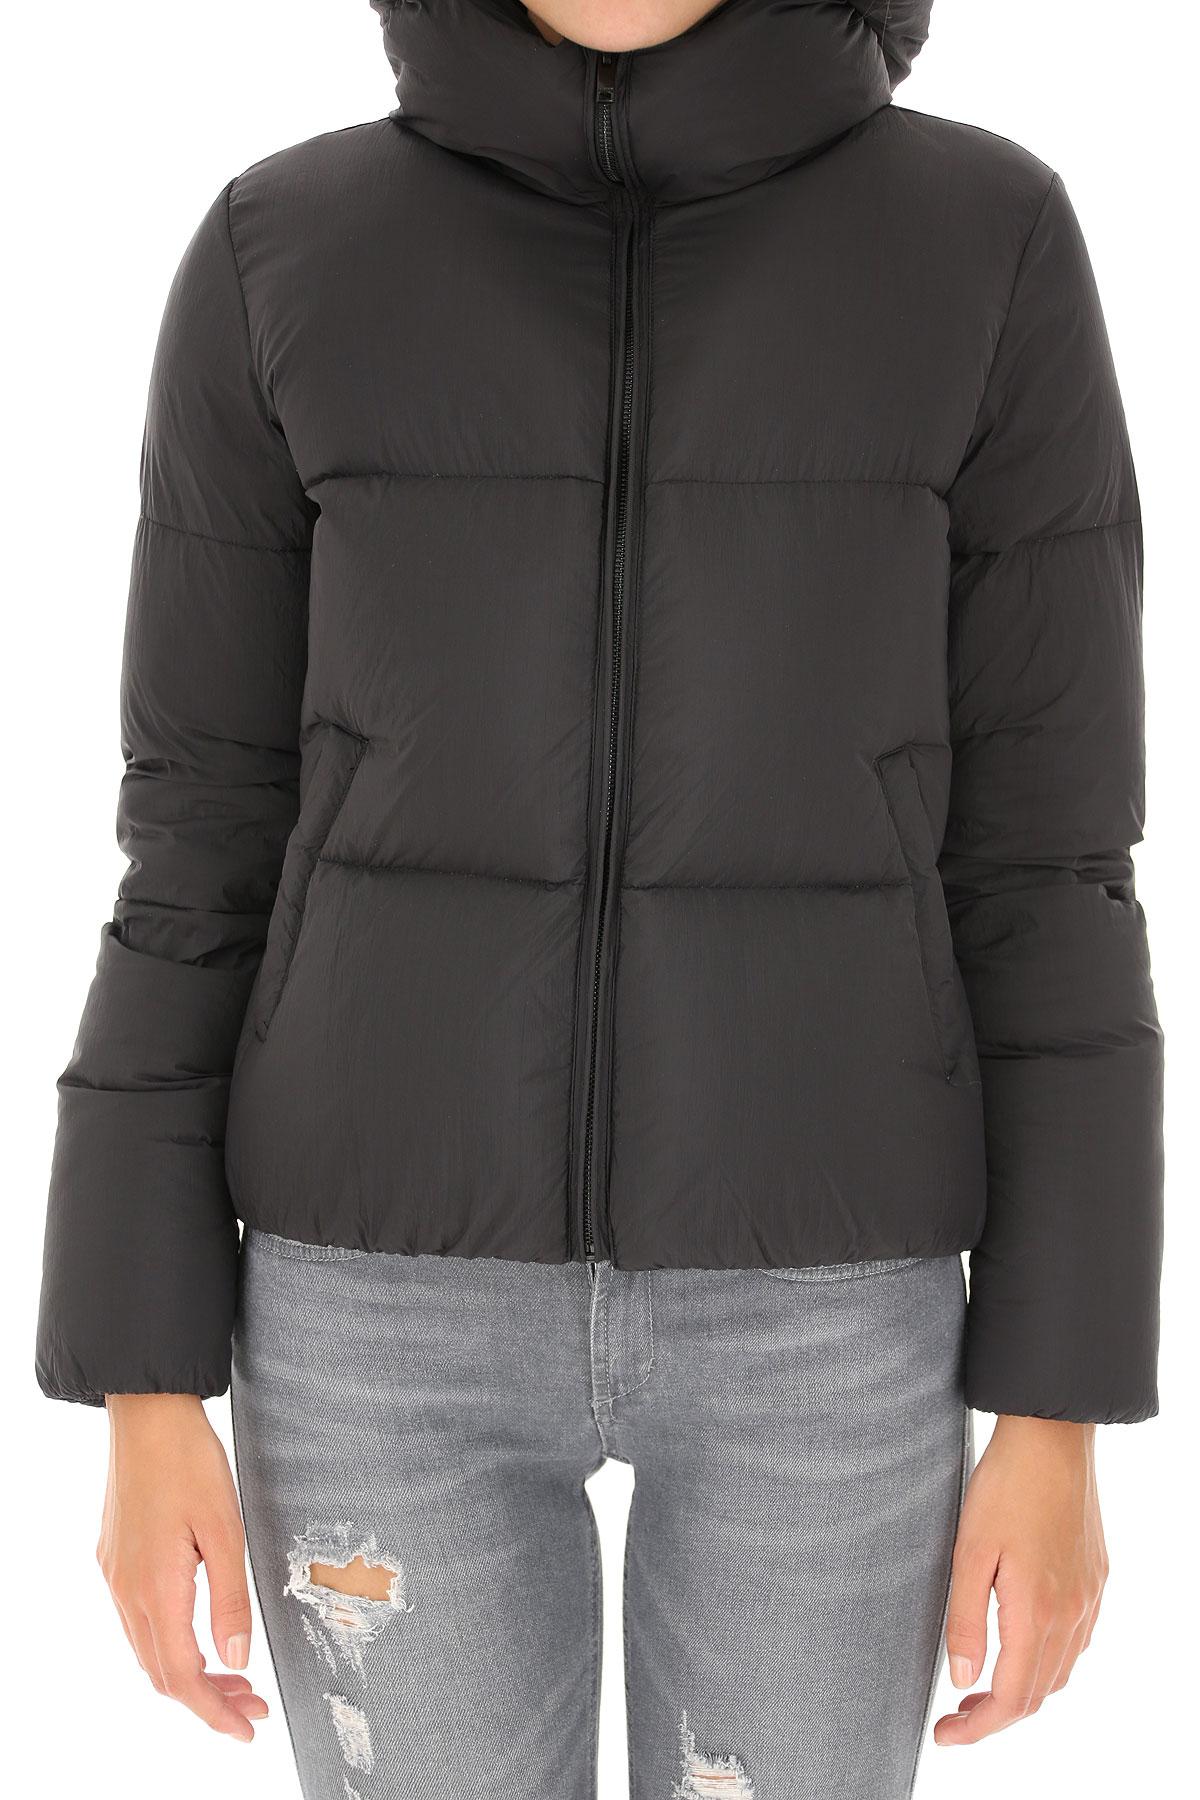 Dondup Synthetic Down Jacket For Women in Black - Lyst